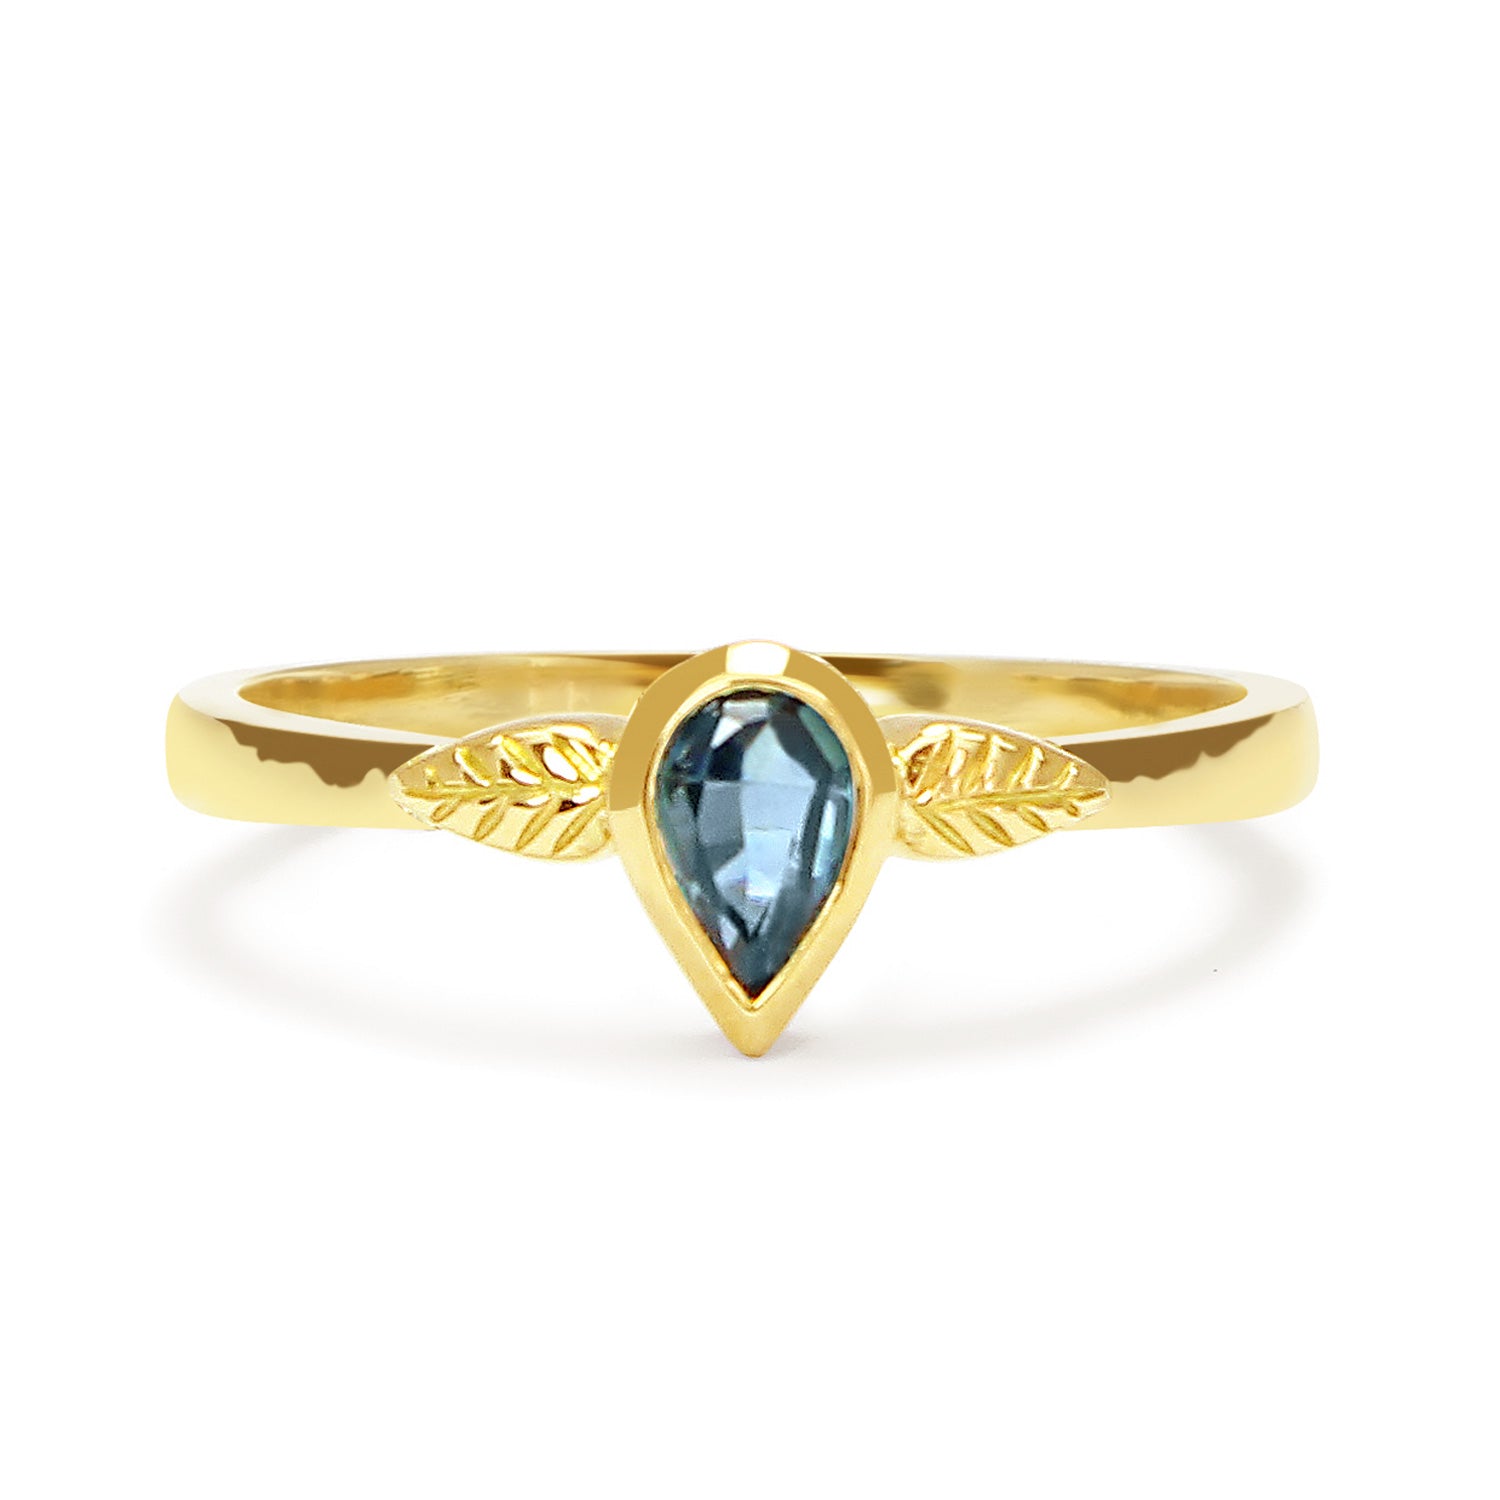 Bespoke nature-inspired engagement ring with pear-cut Malawi sapphire and 18ct recycled gold band